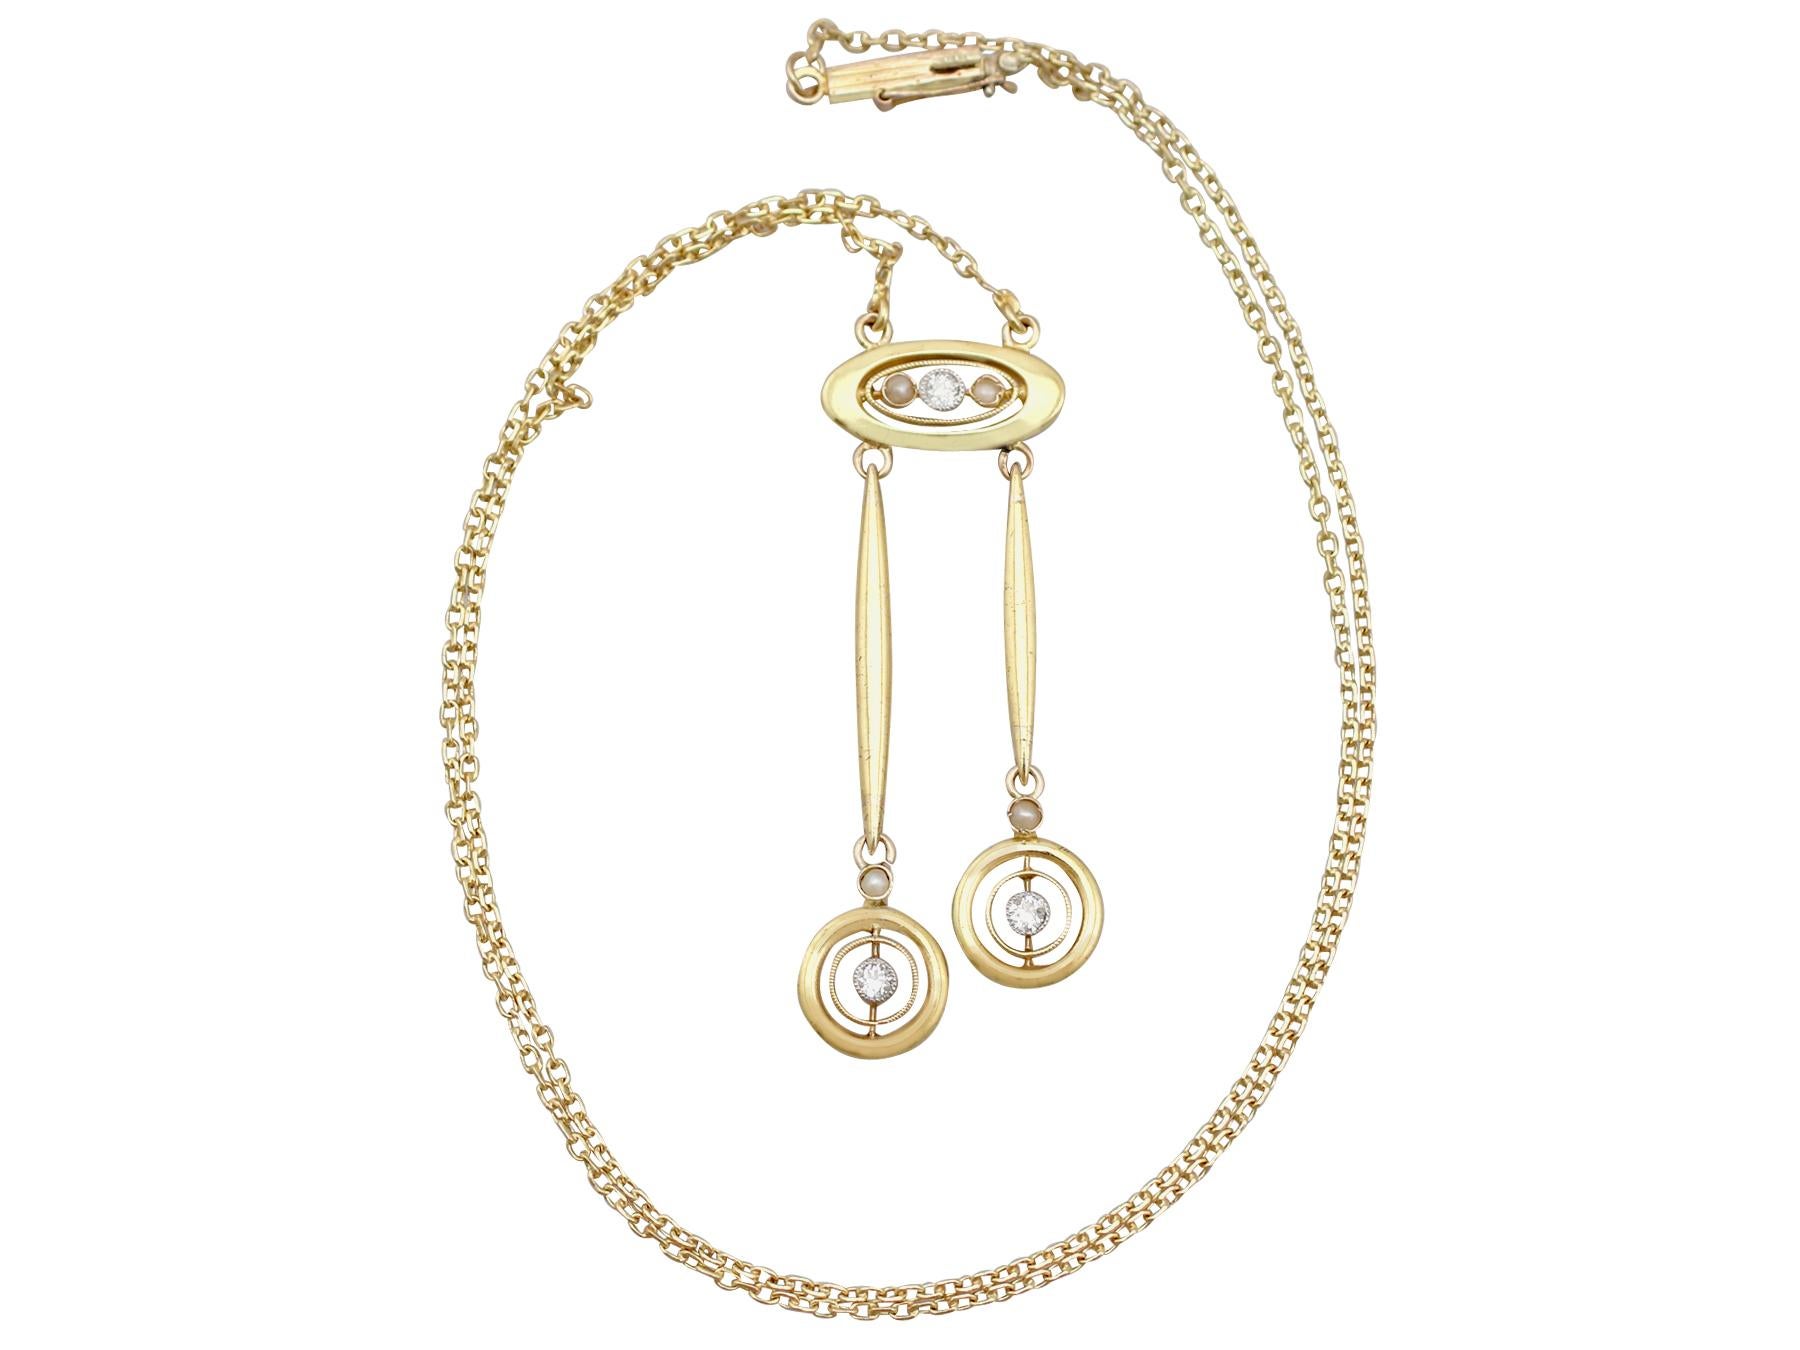 An impressive antique 0.10 carat diamond and seed pearl, 15 karat yellow gold and 15 karat white gold set necklace; part of our diverse antique jewelry and estate jewelry collections.

This fine and impressive diamond and seed pearl necklace has